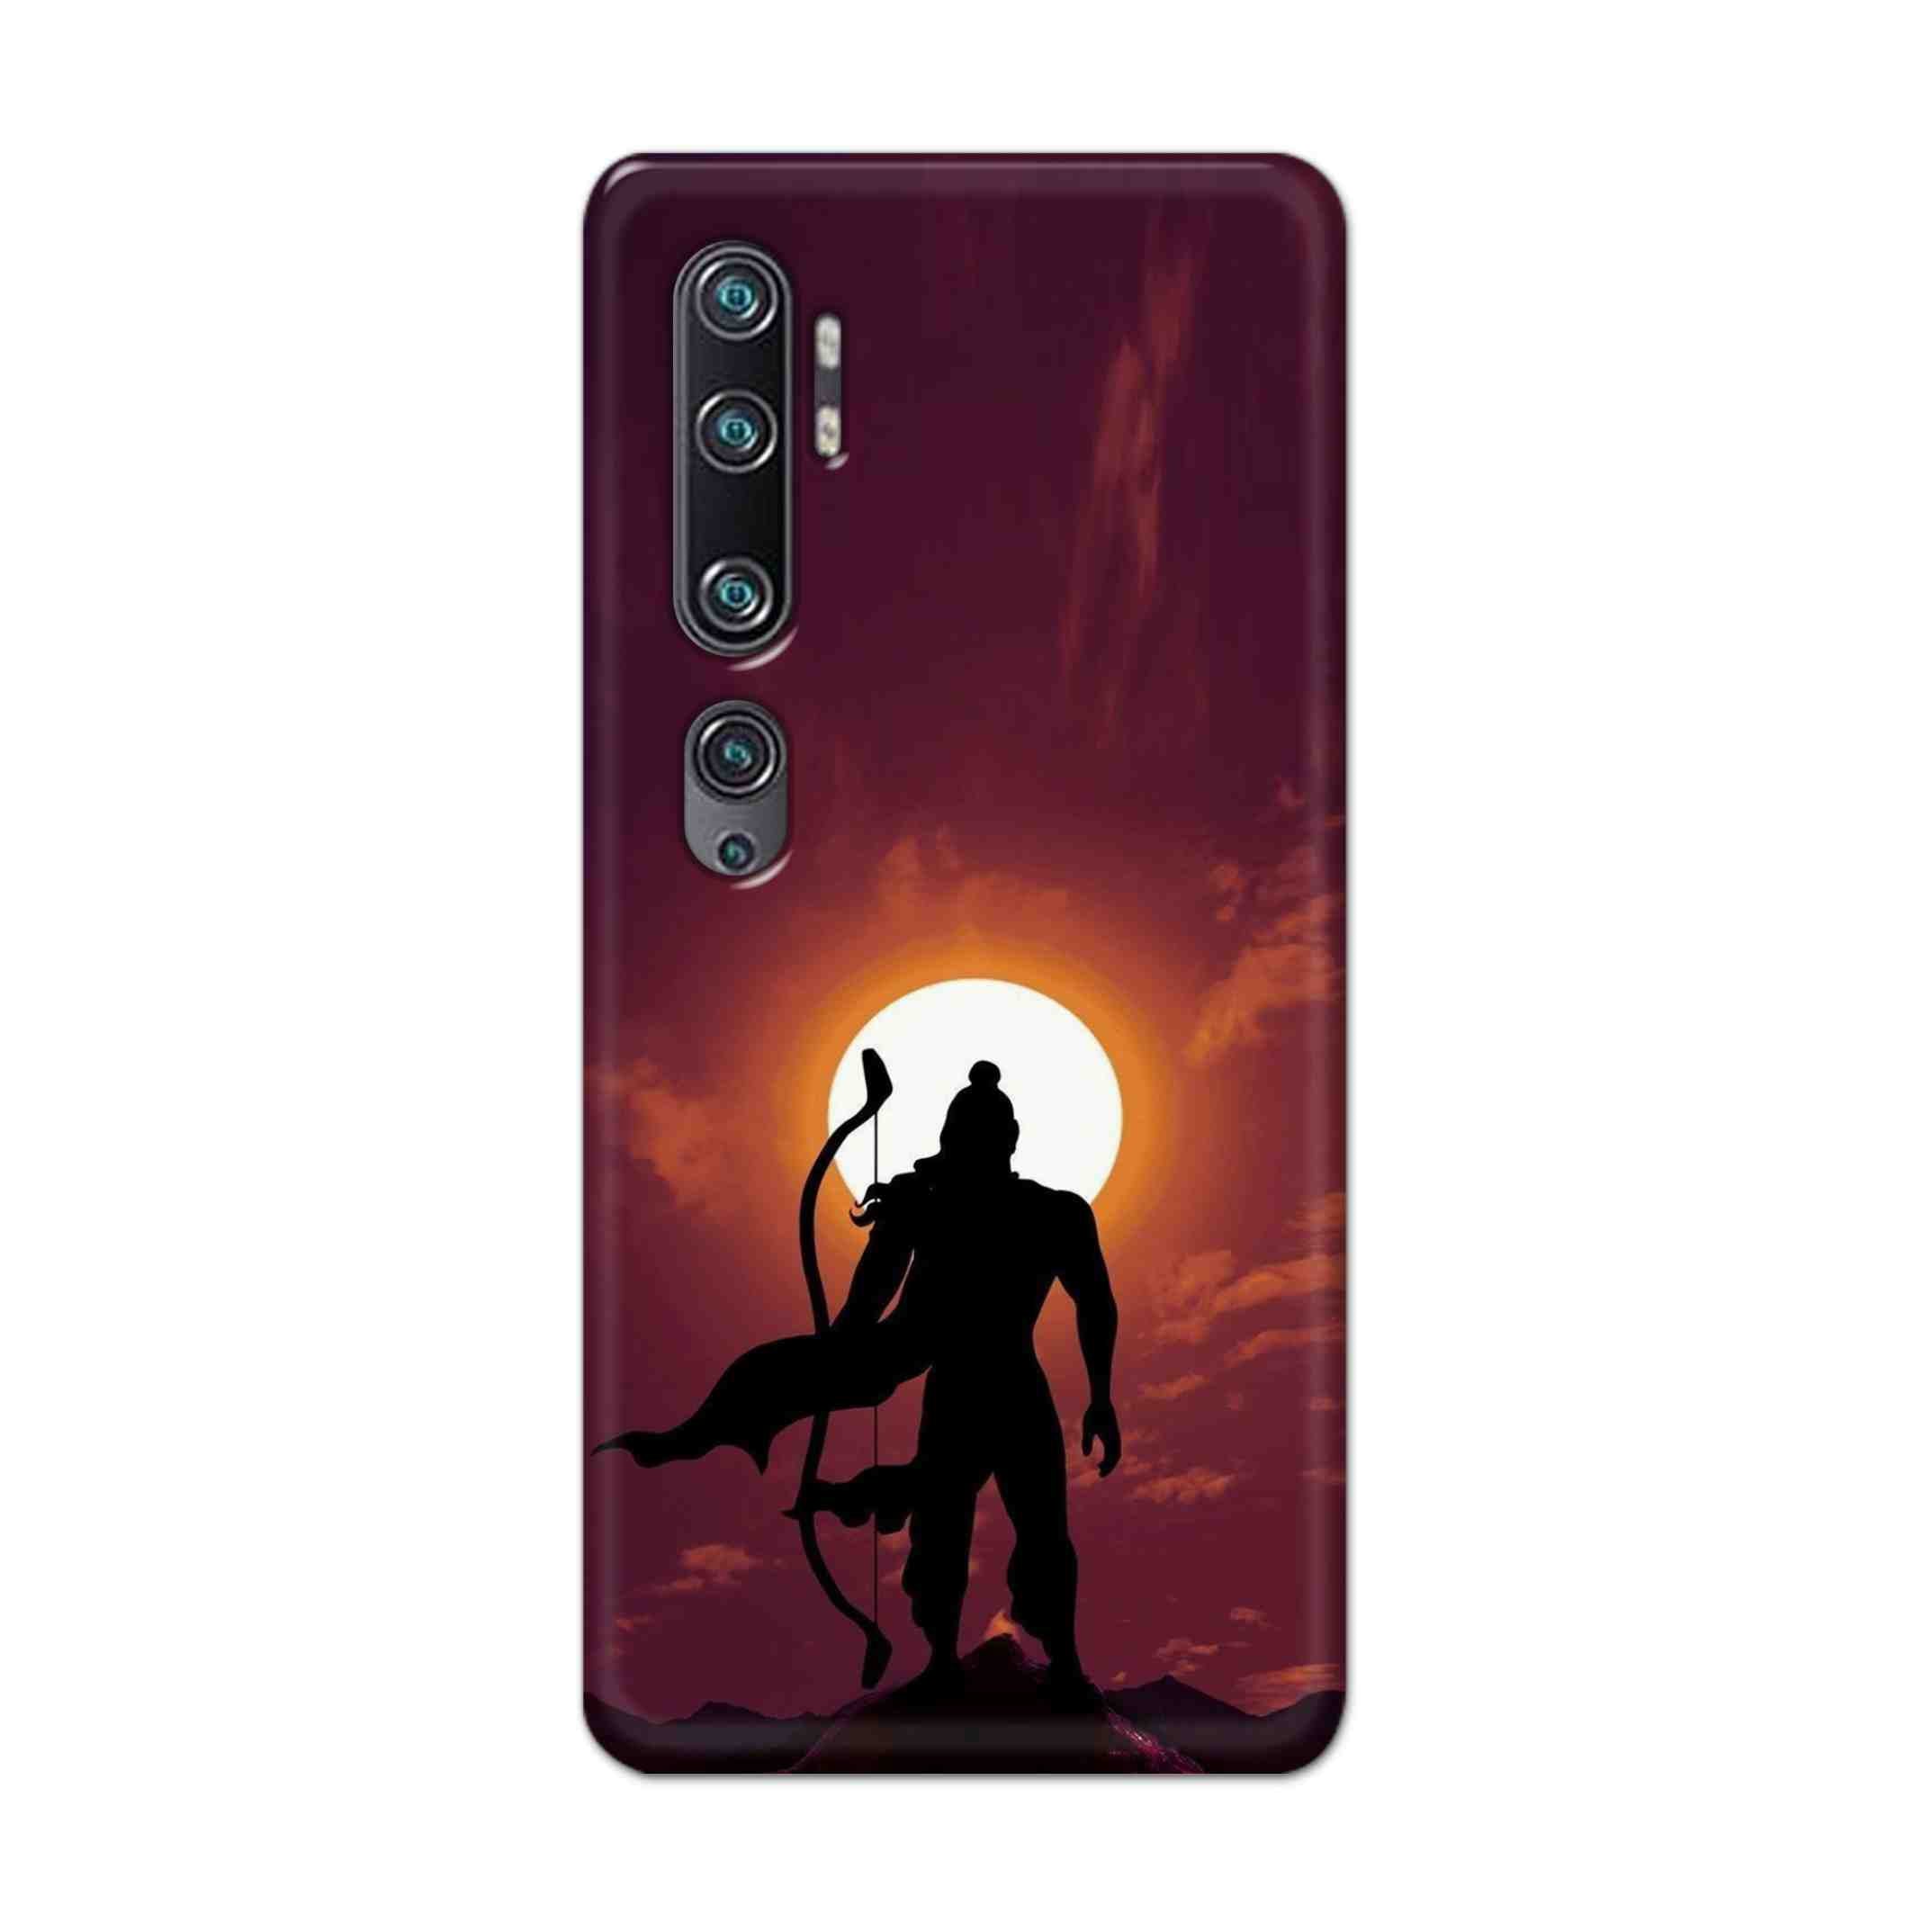 Buy Ram Hard Back Mobile Phone Case Cover For Xiaomi Mi Note 10 Pro Online